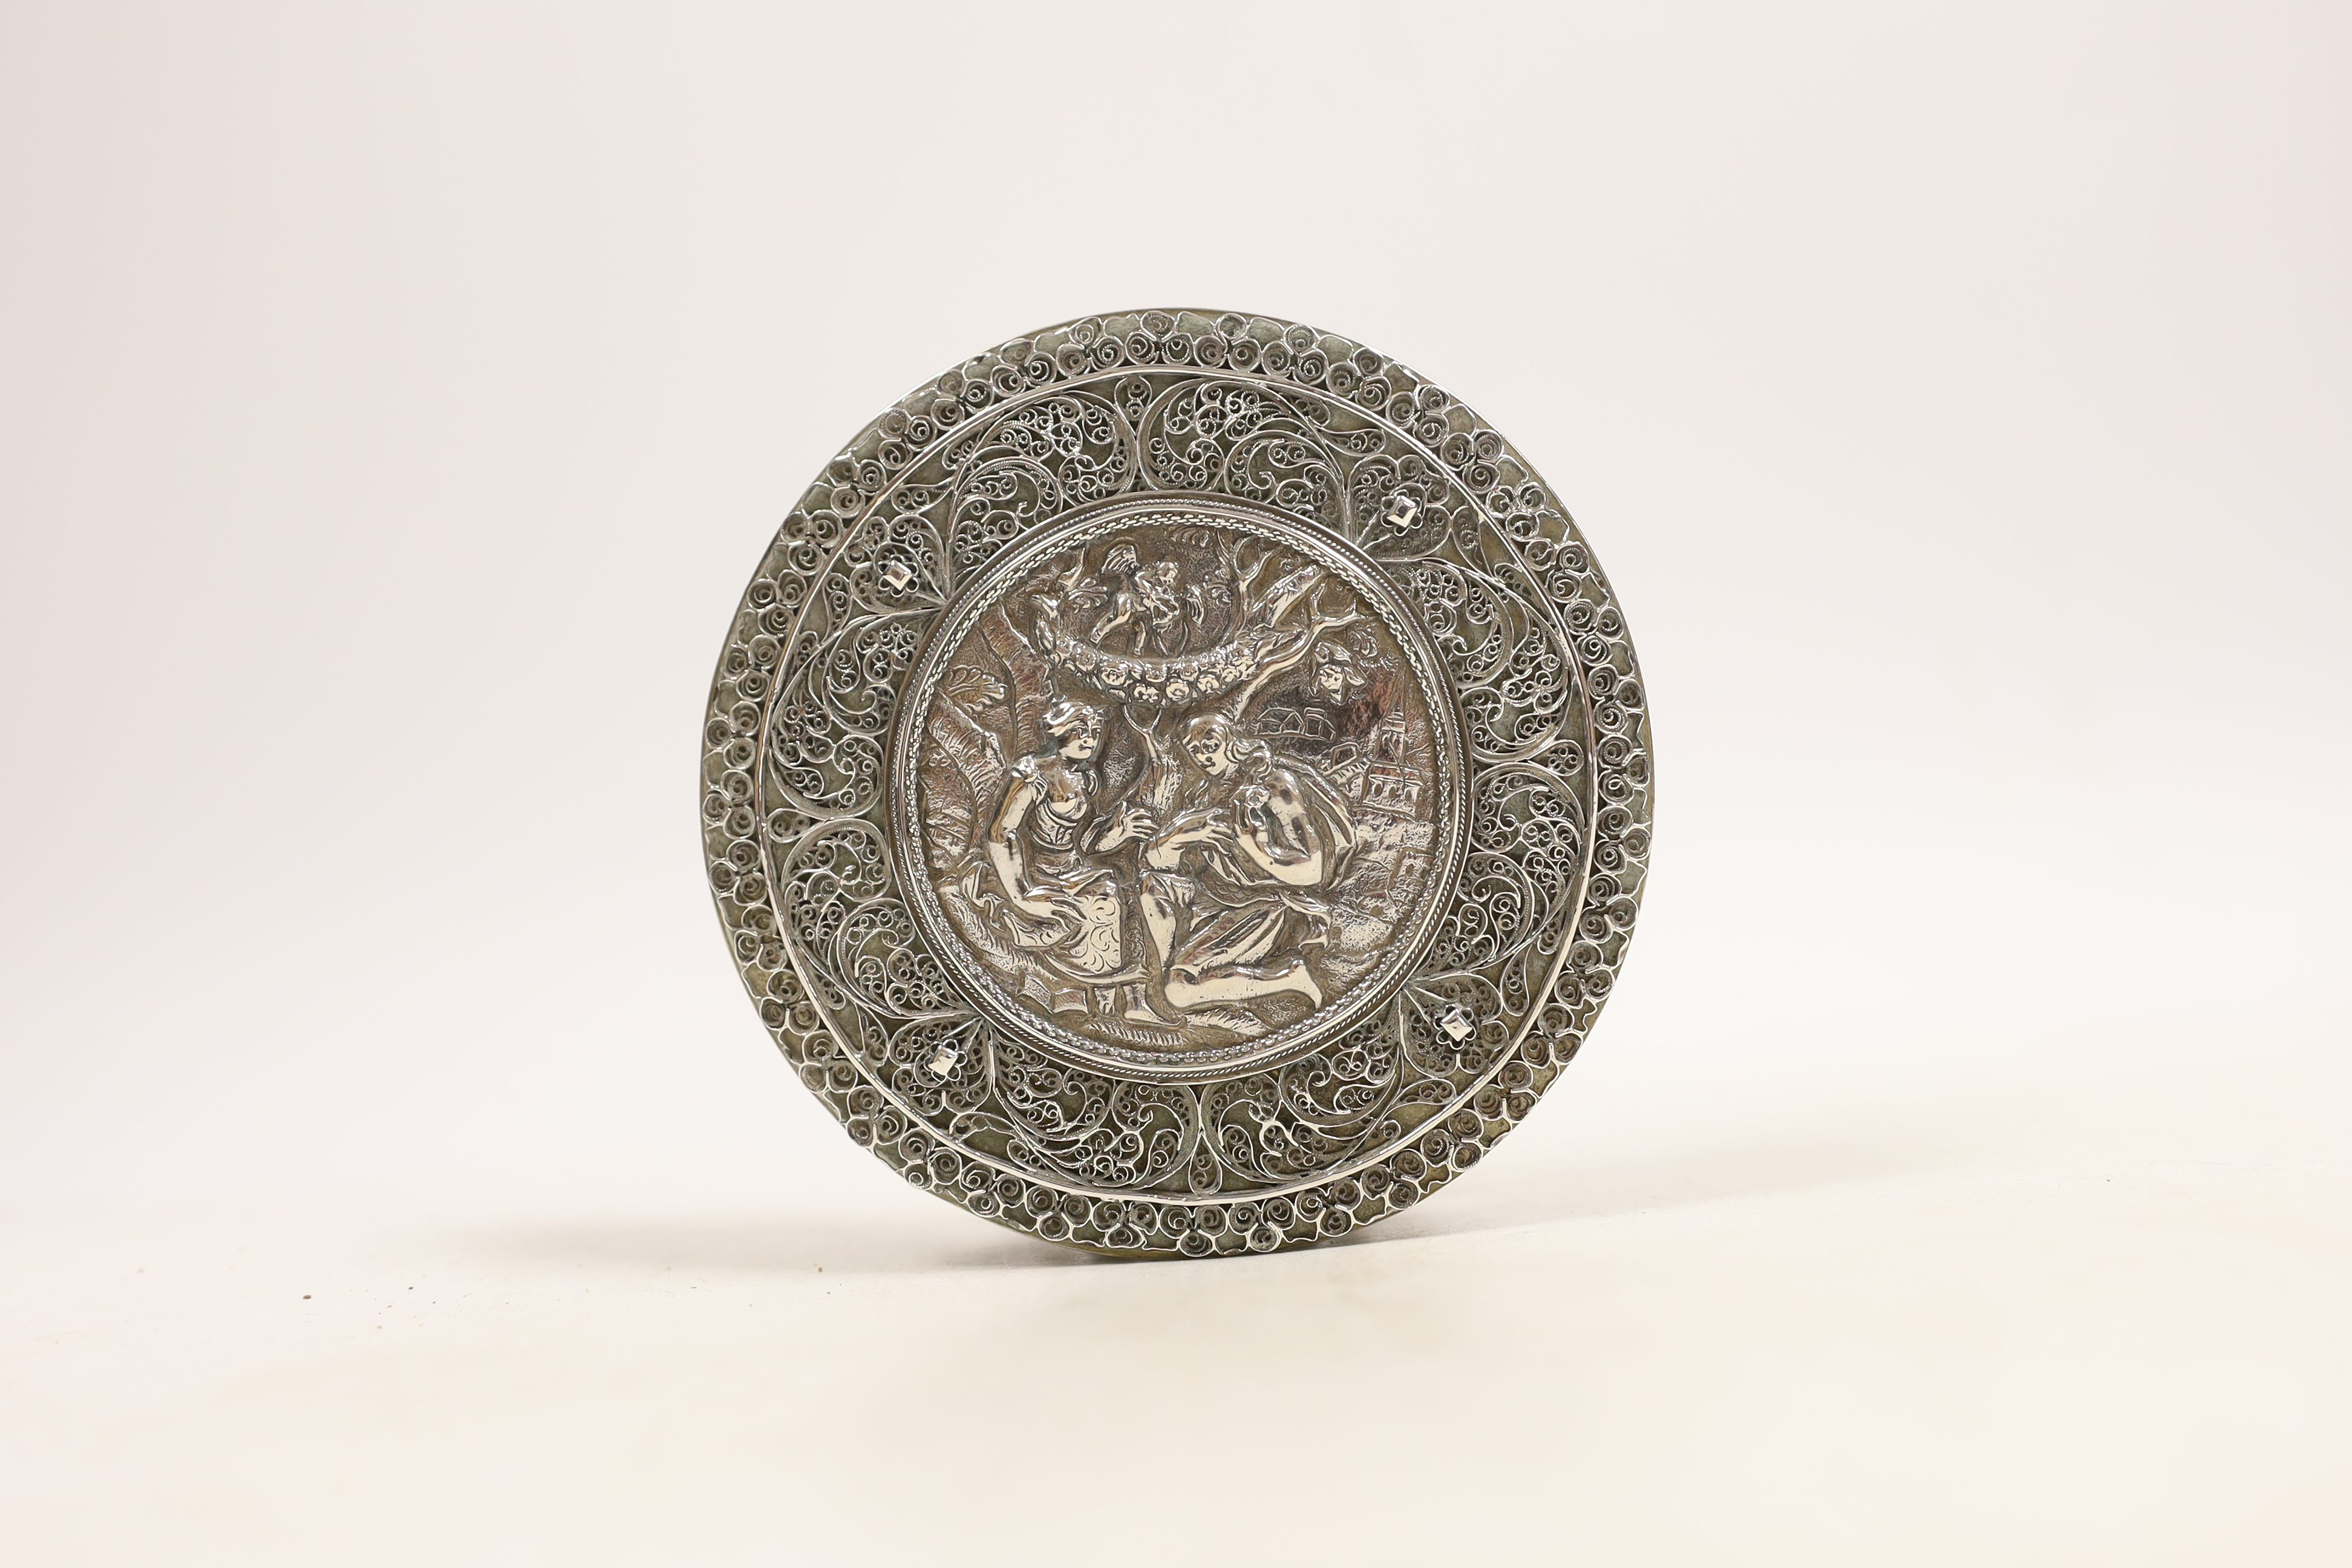 A continental white metal circular box and cover, with applied filigree decoration, diameter 11.2cm, 8.5oz.